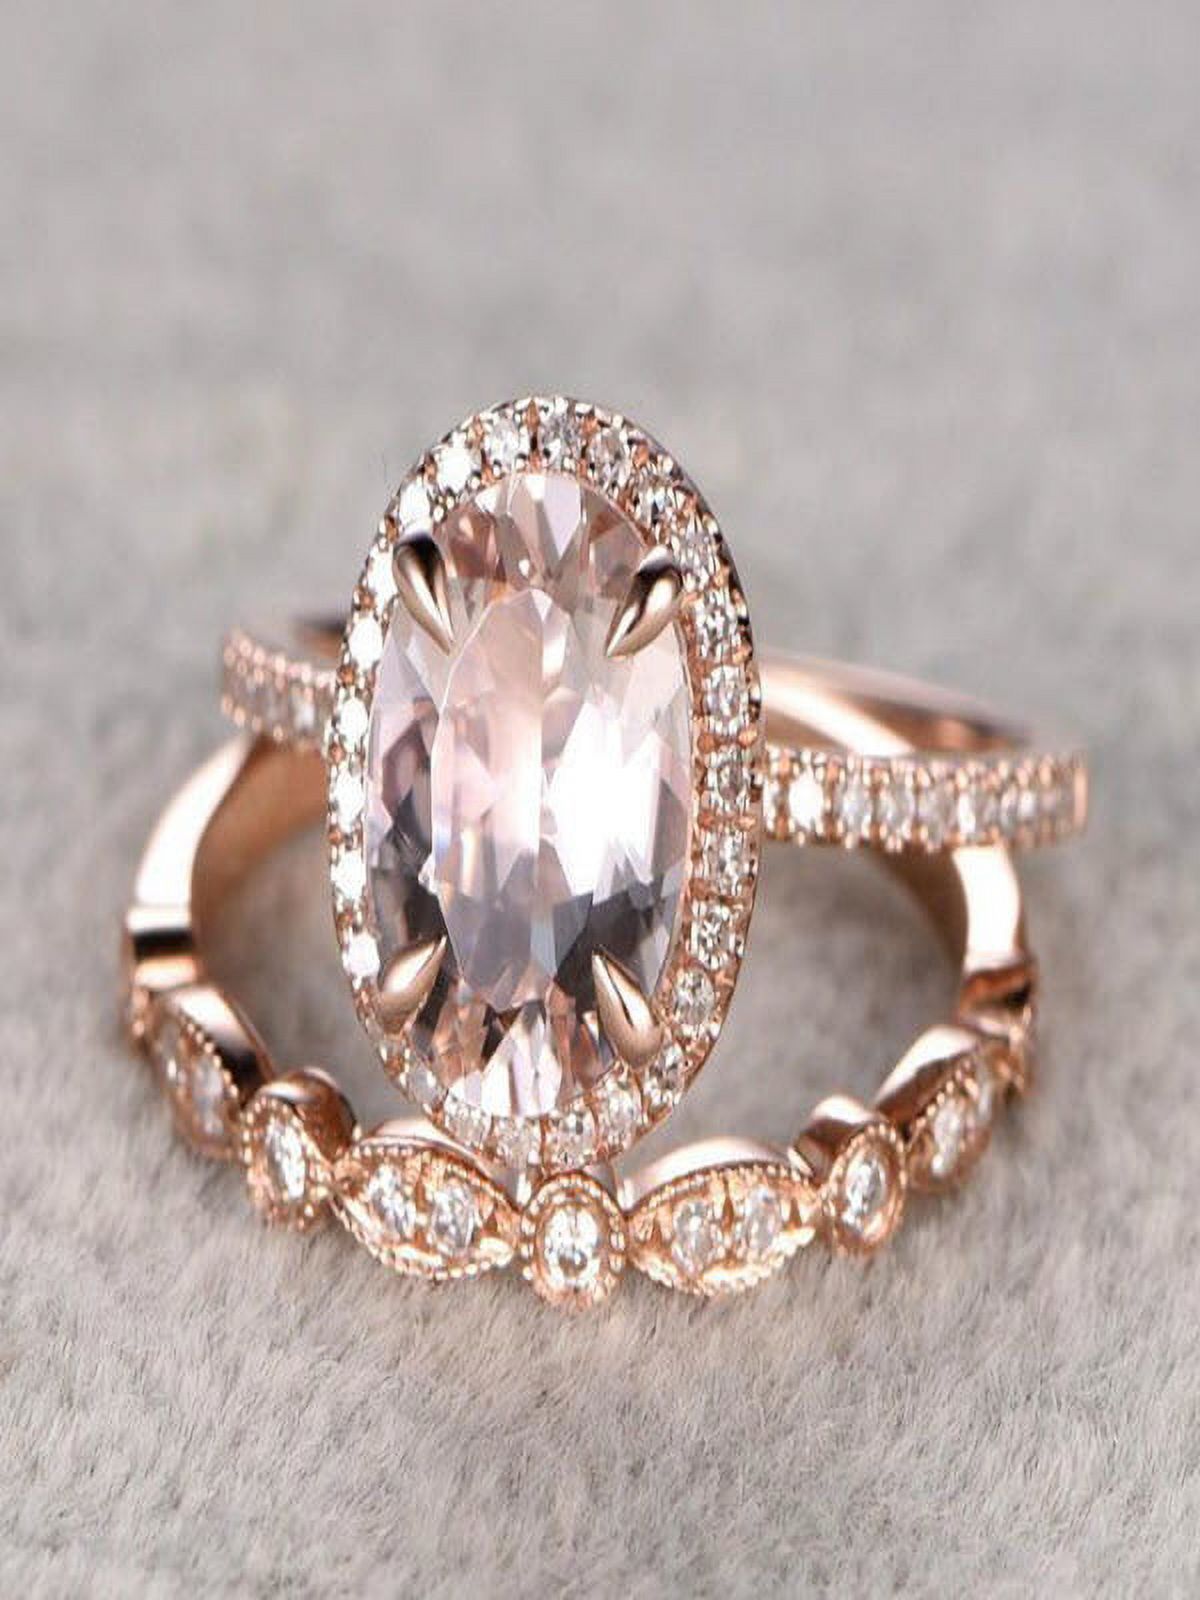 Limited Time Sale 1.50 carat Morganite and Diamond Wedding Bridal Ring Set in 10k Rose Gold, One Engagement Ring & Wedding Band - image 1 of 2